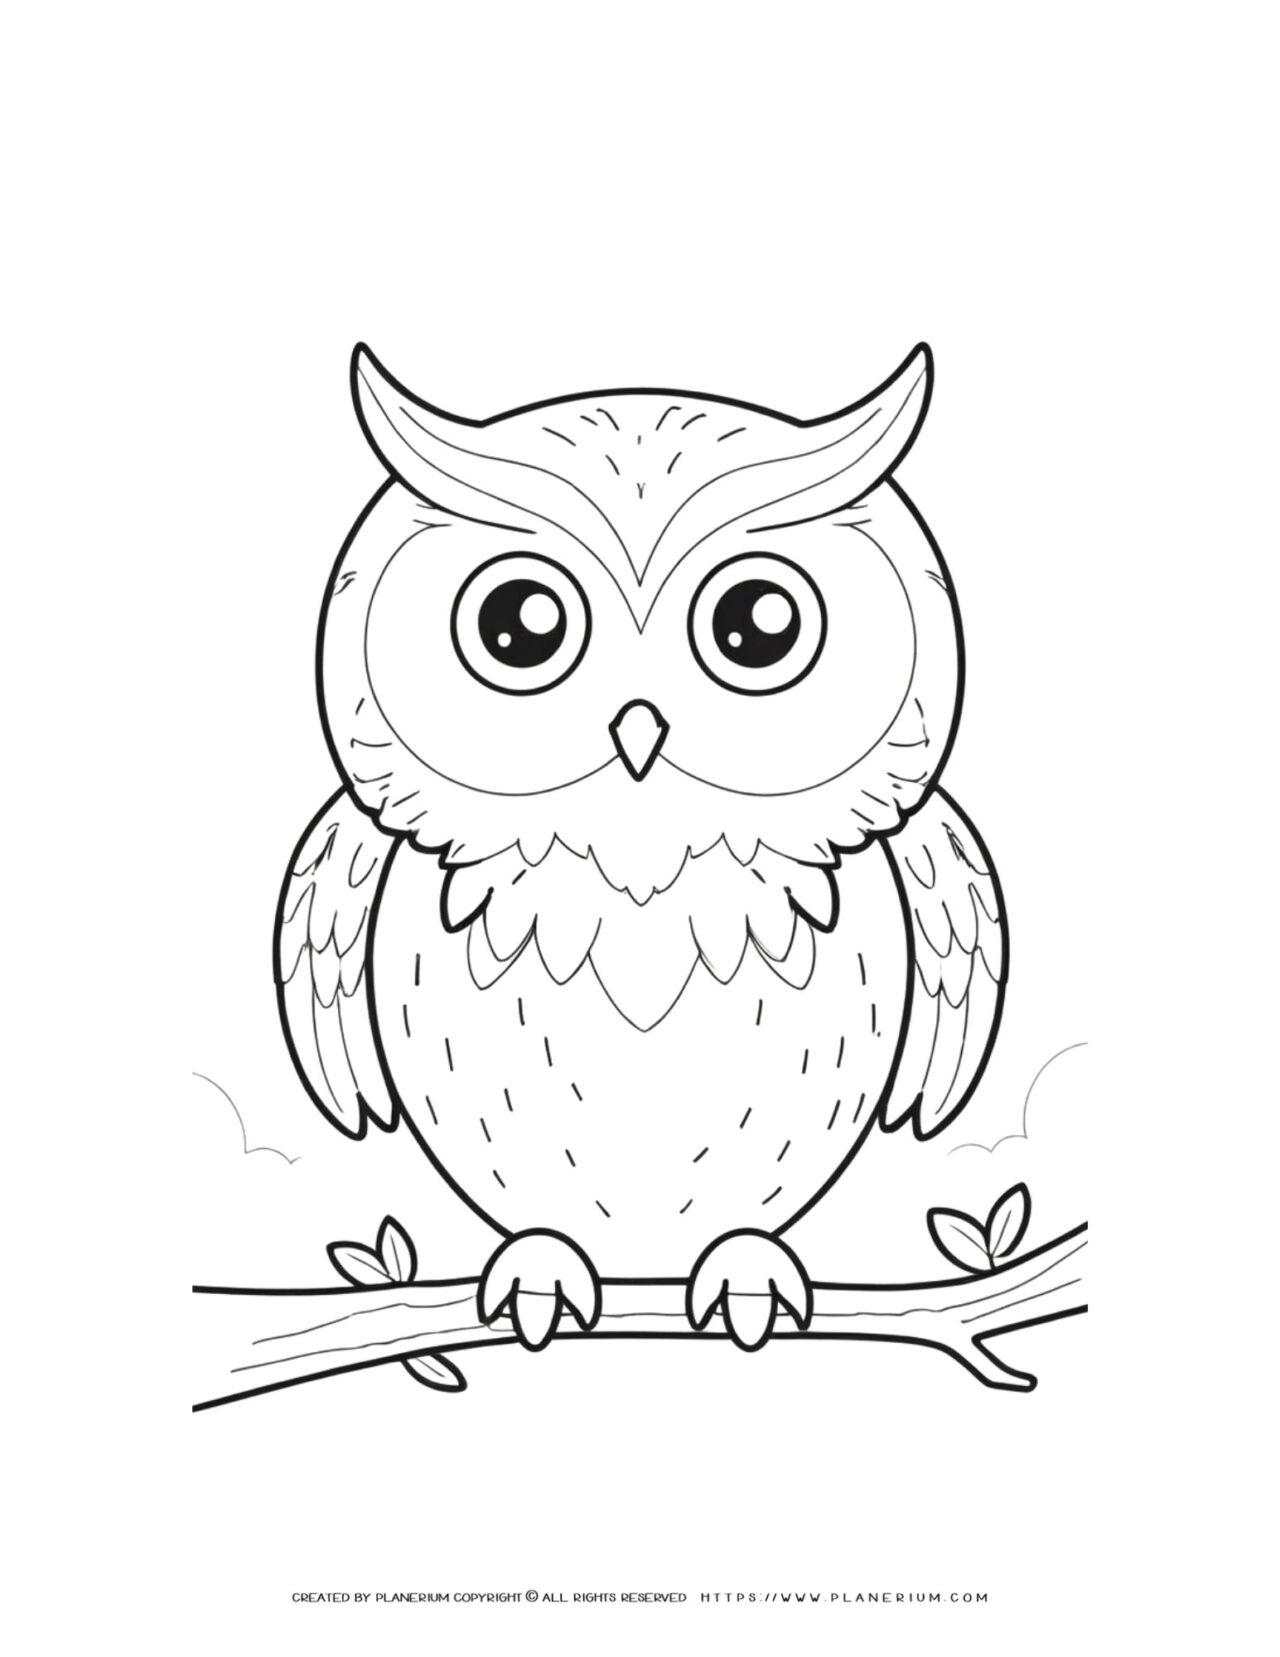 Owl-on-a-Tree-Outline-Coloring-Page-for-Kids